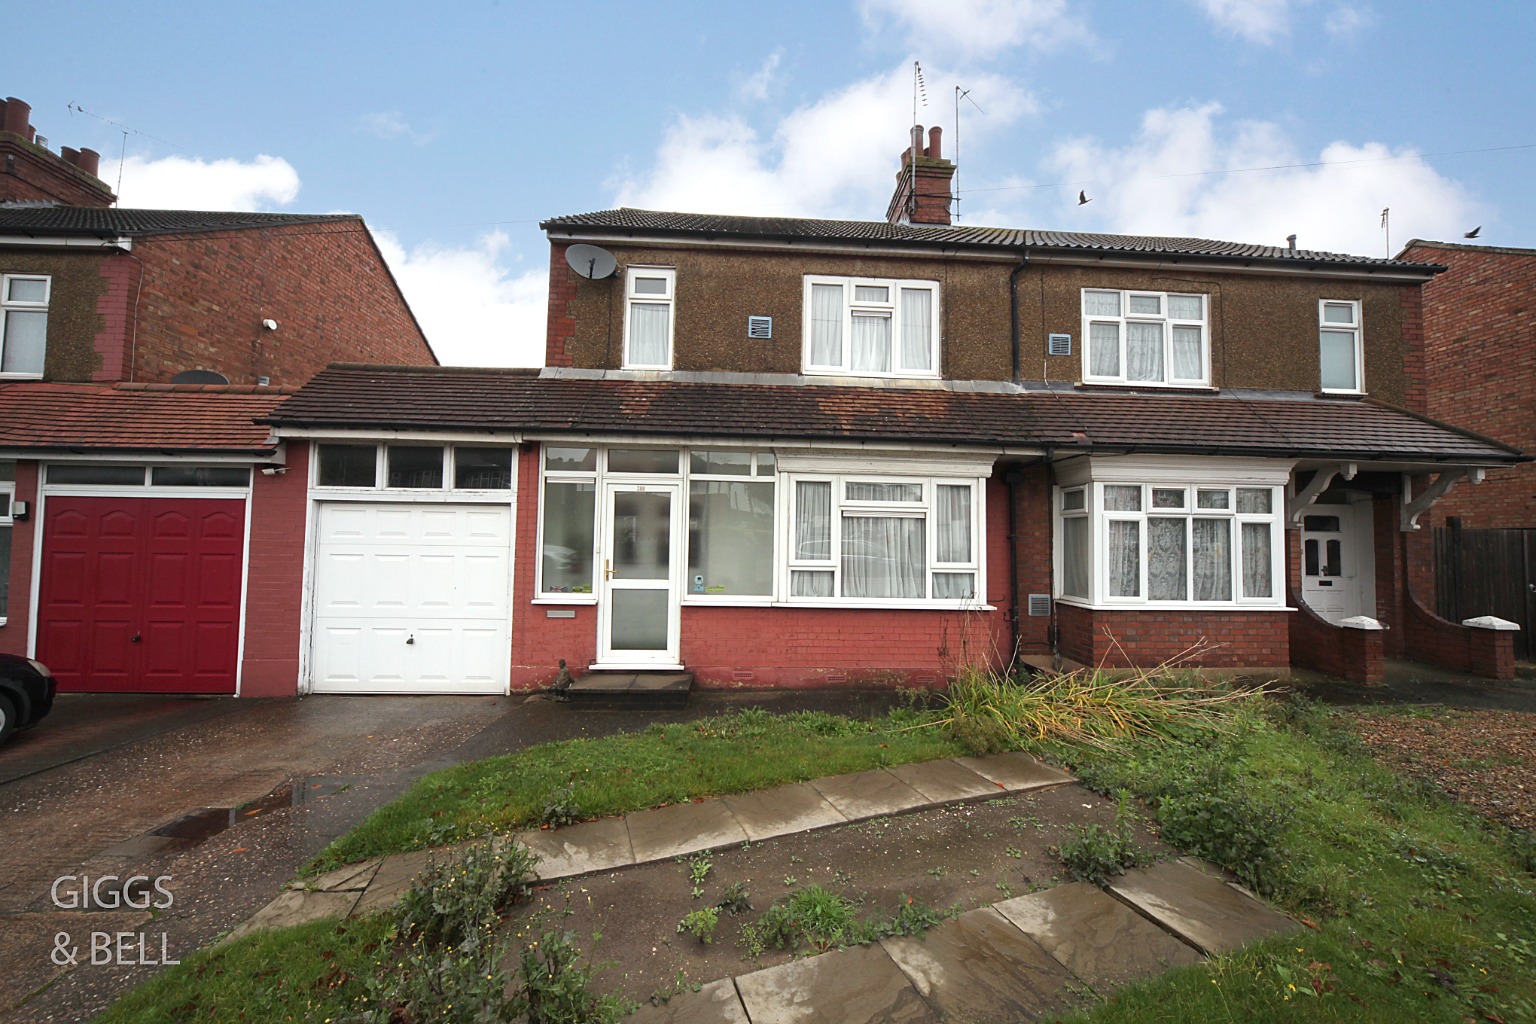 3 bed semi-detached house for sale in Luton Road, Dunstable, LU5 